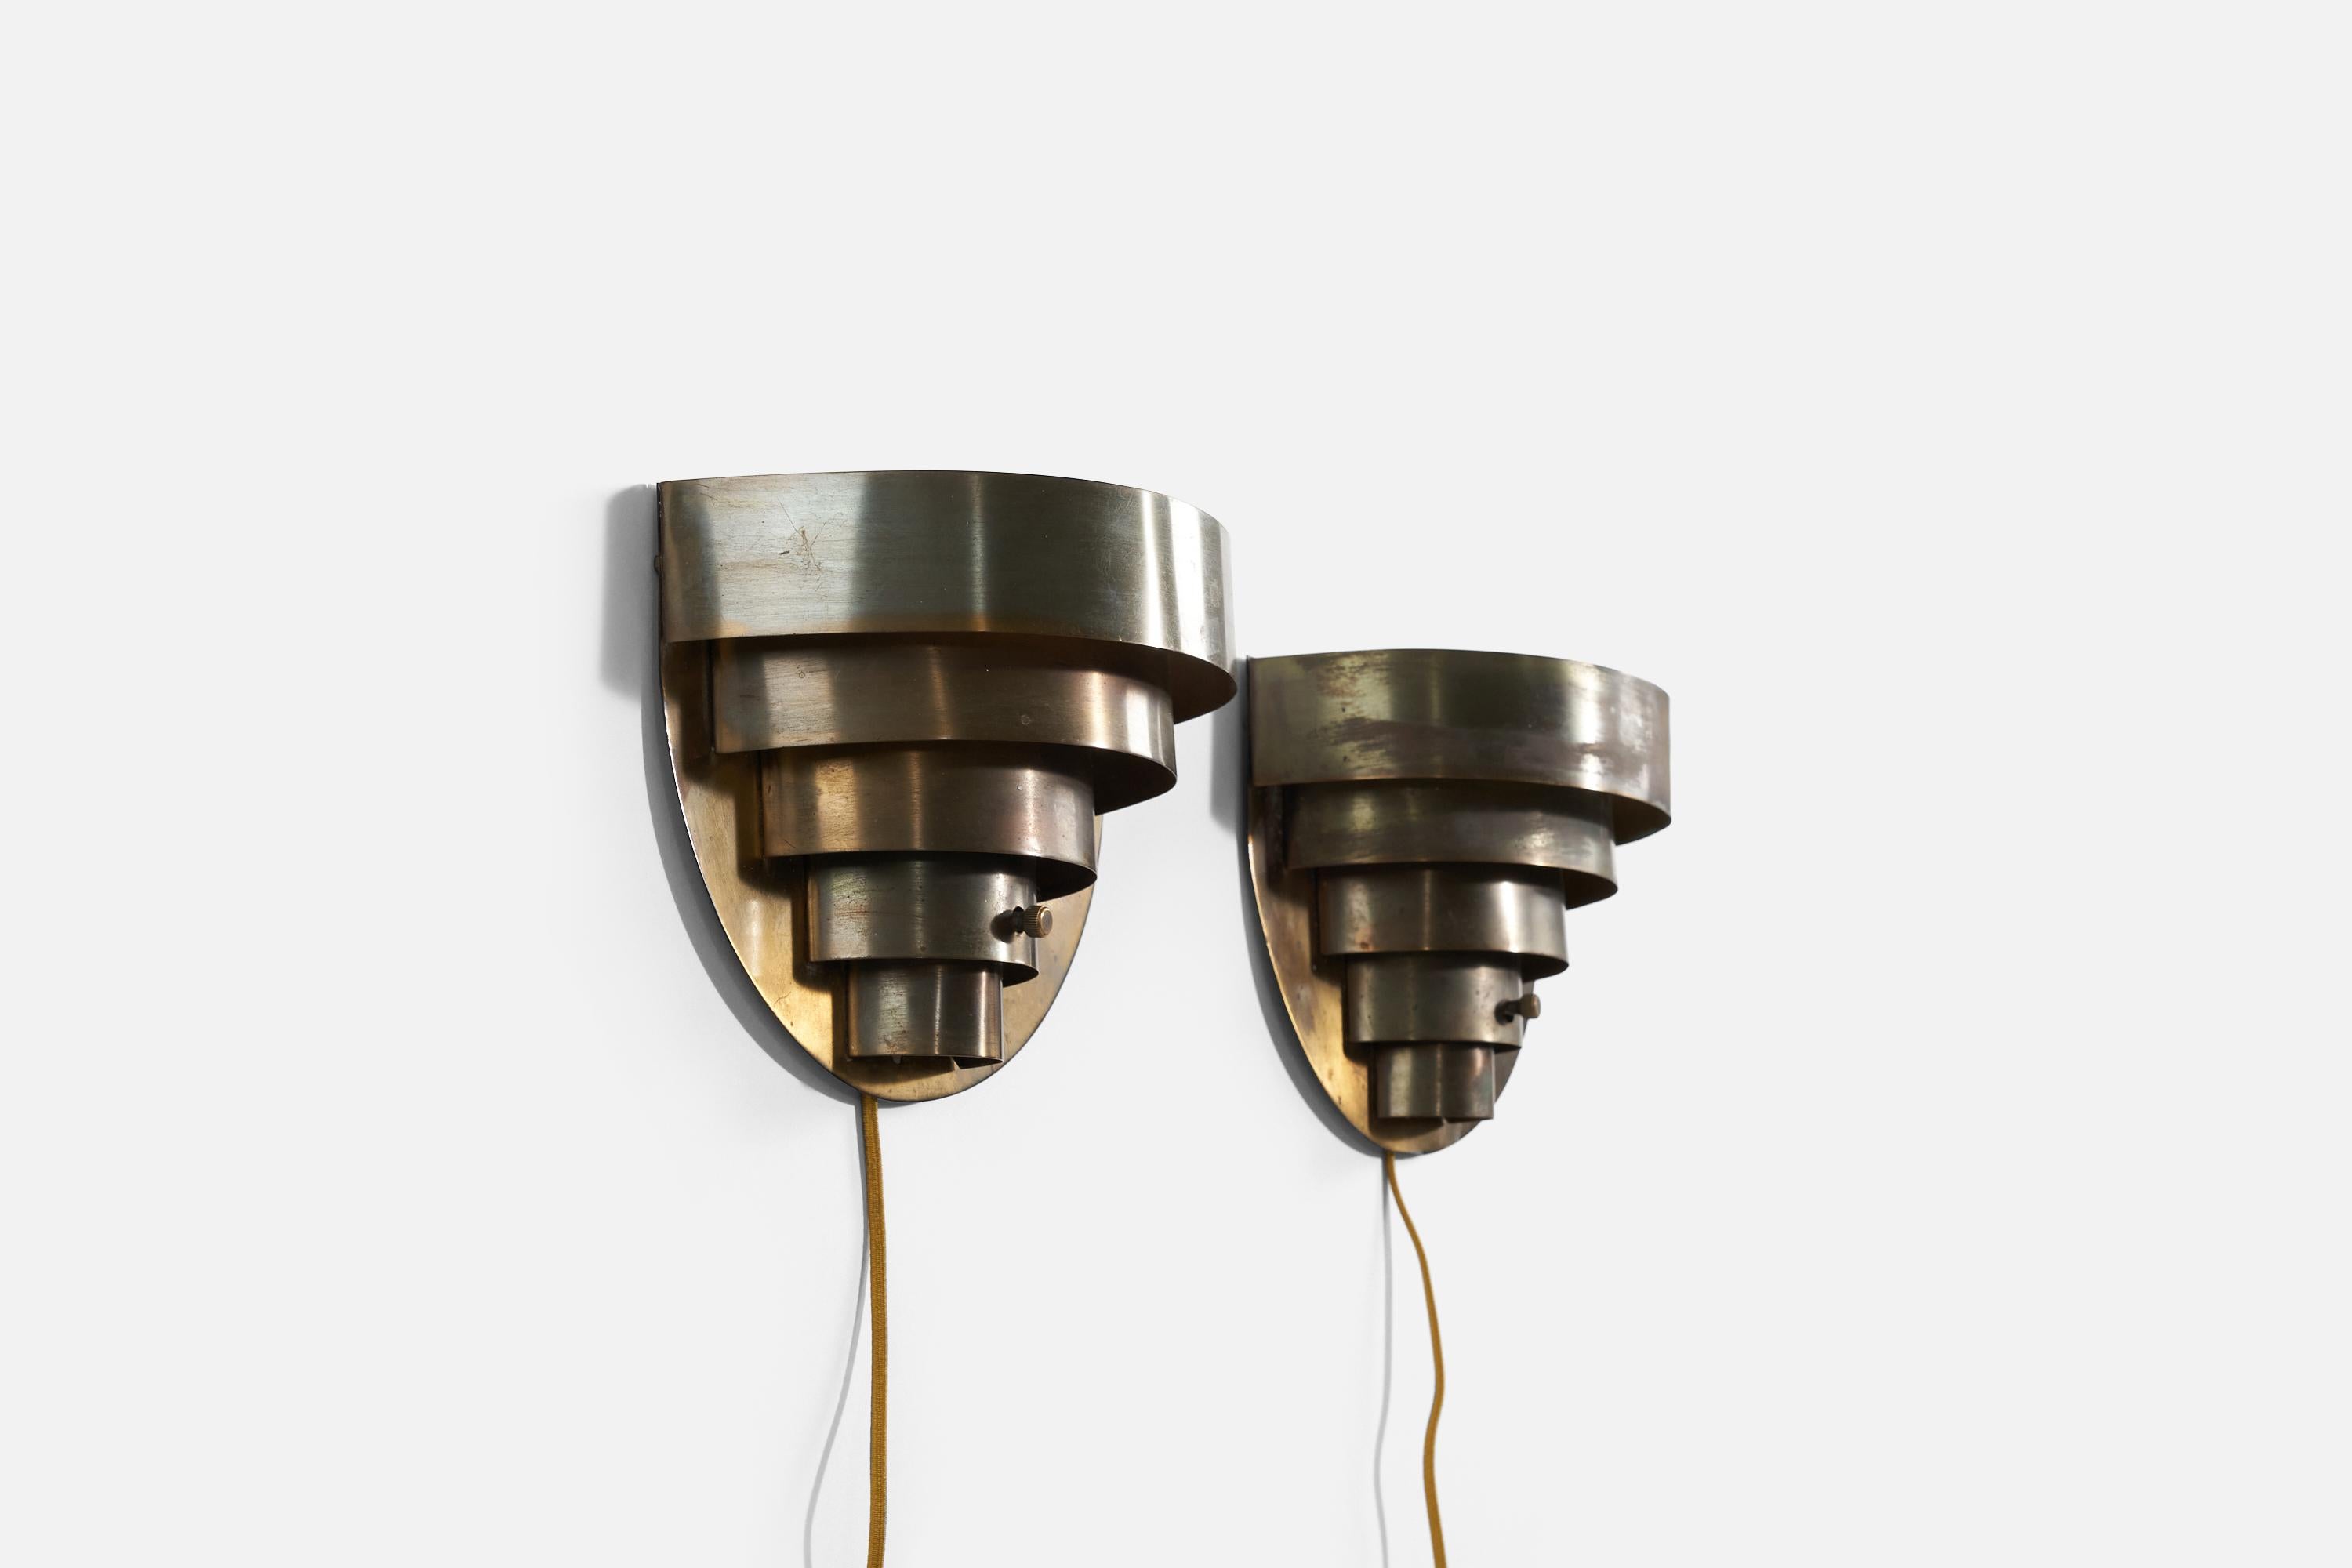 A pair of brass wall lights produced by Kurt Versen, United States, 1950s.